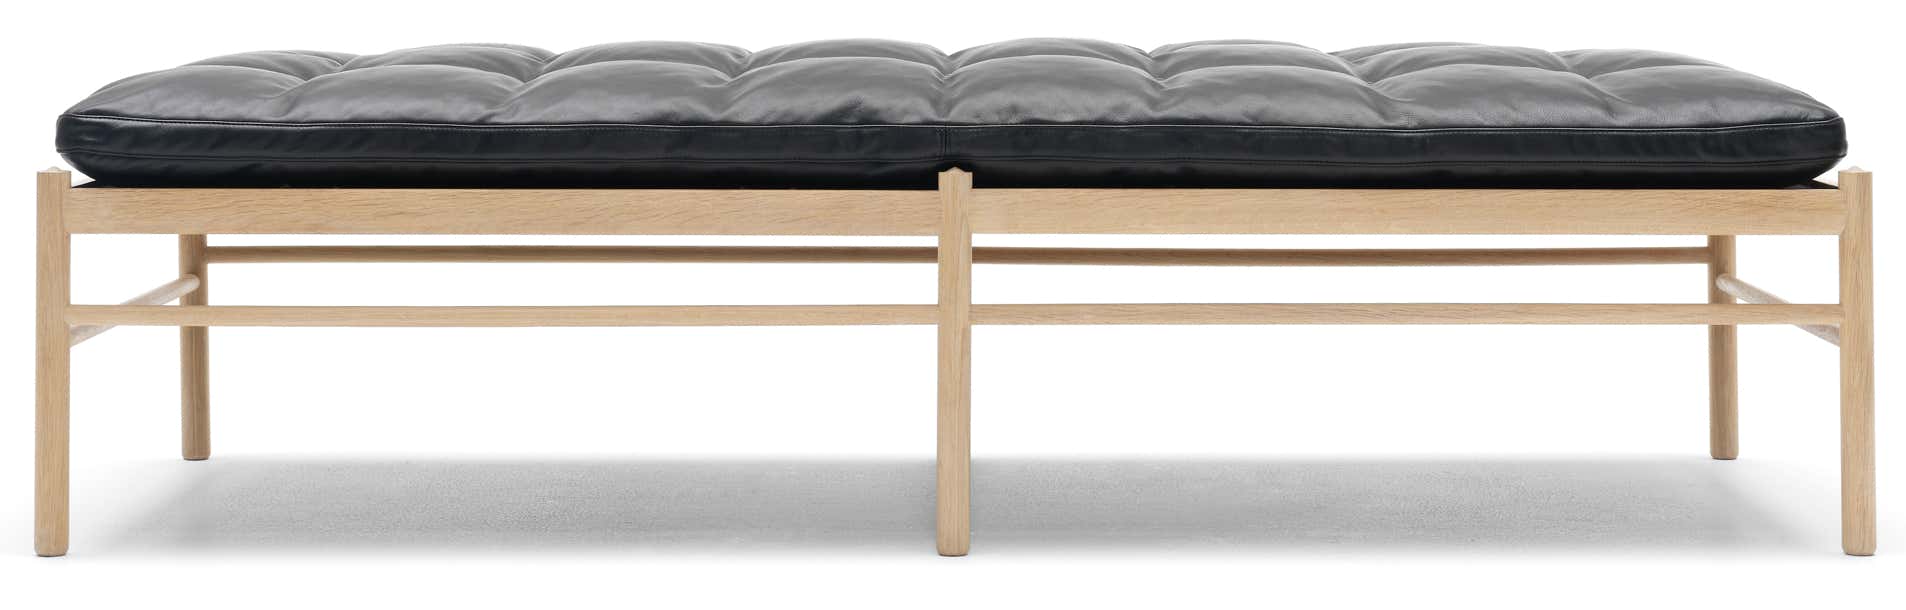 OW150 Colonial Daybed  Carl Hansen & SÃ¸n  Ole Wanscher, 1950